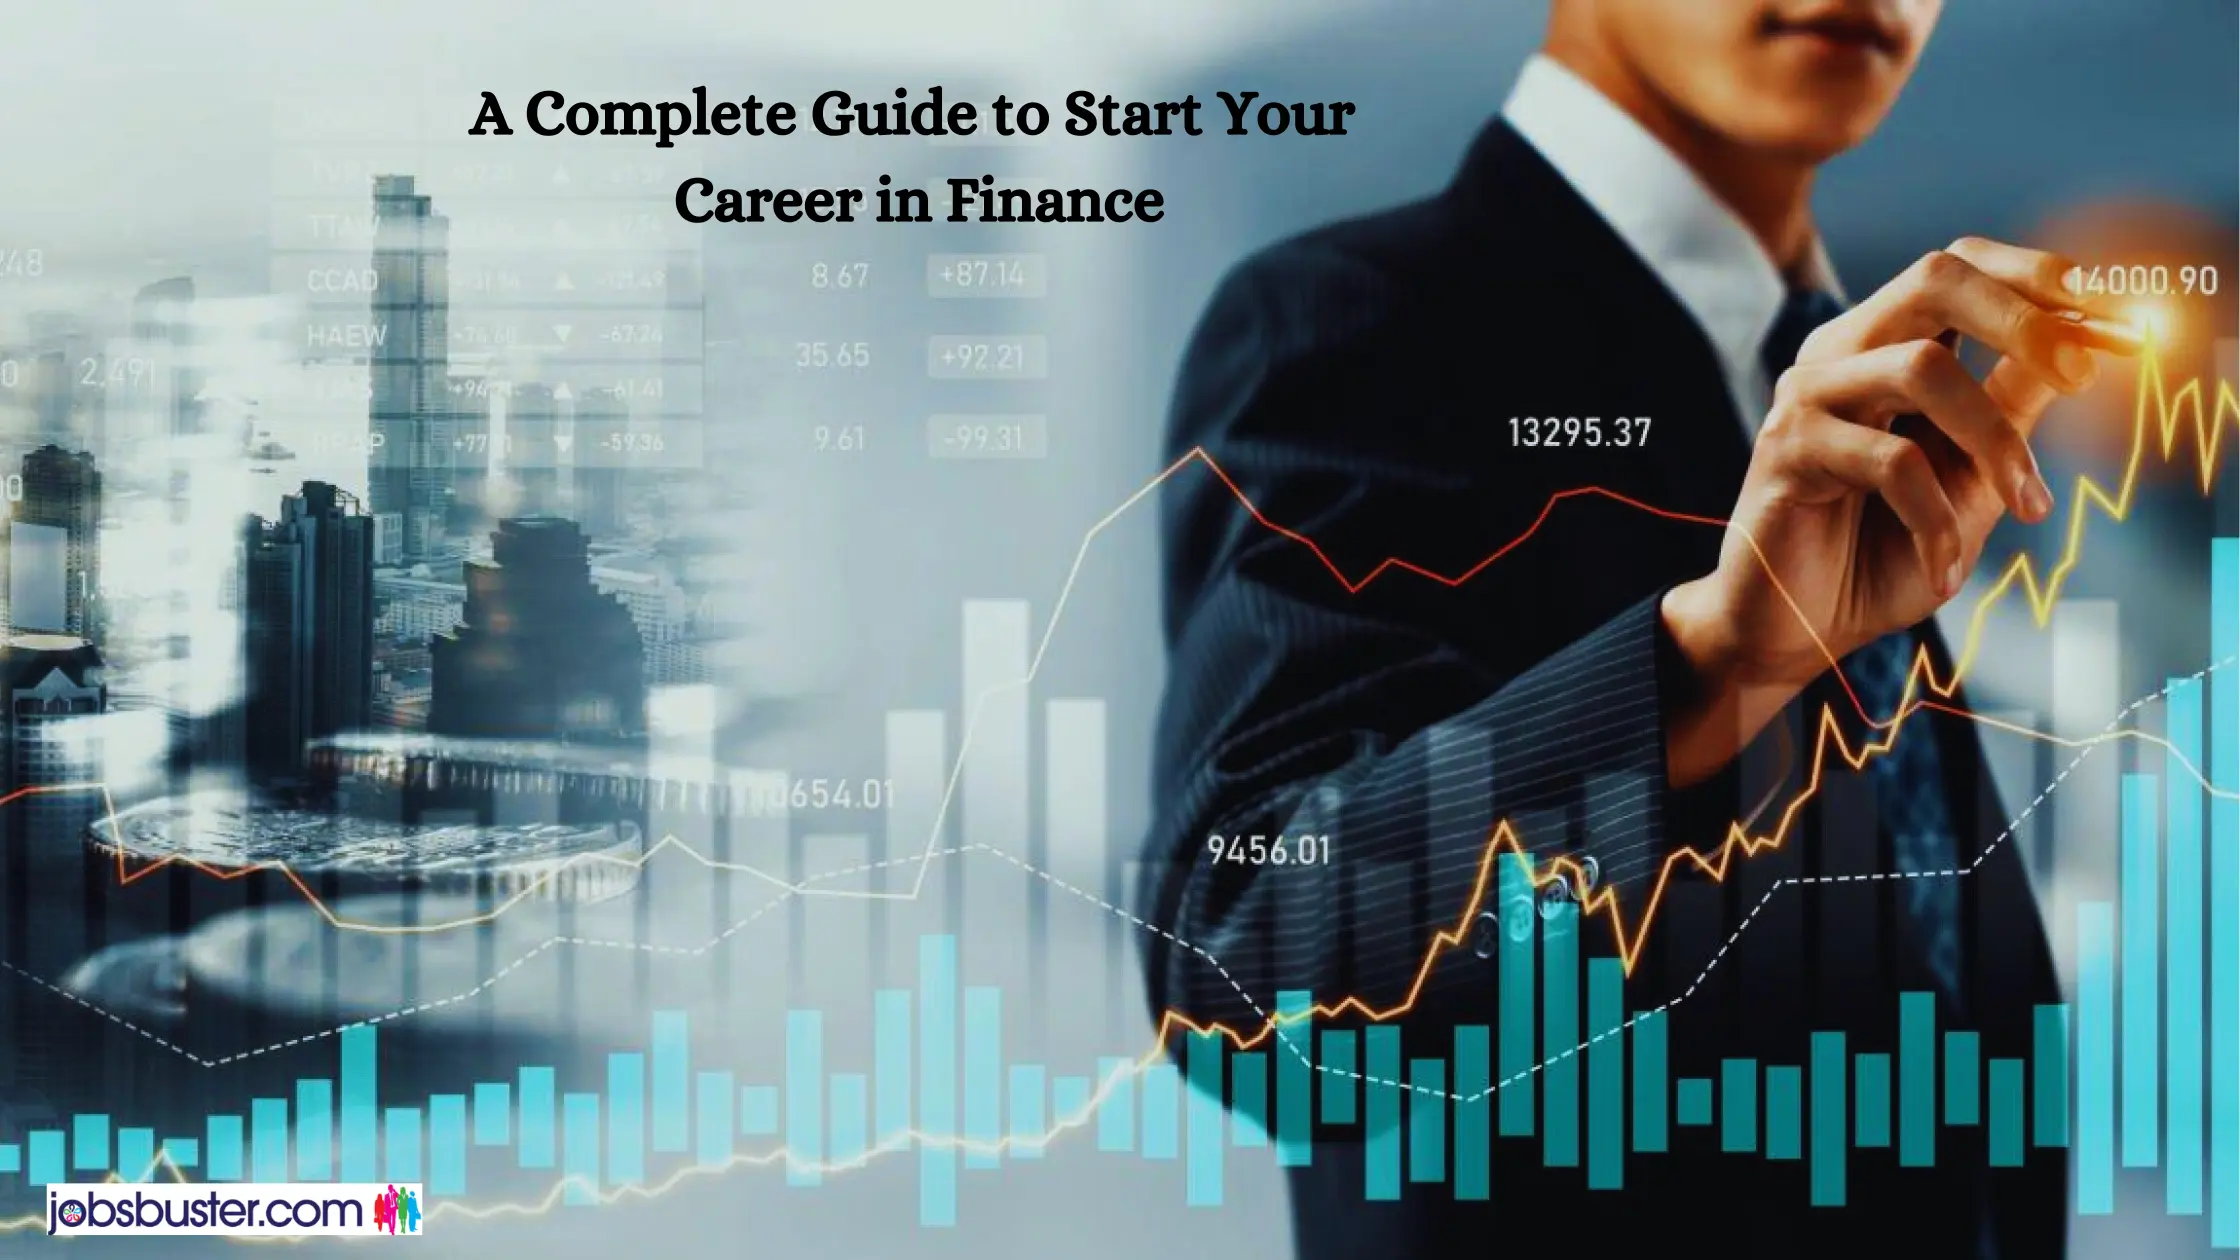 A Complete Guide to Start Your Career in Finance